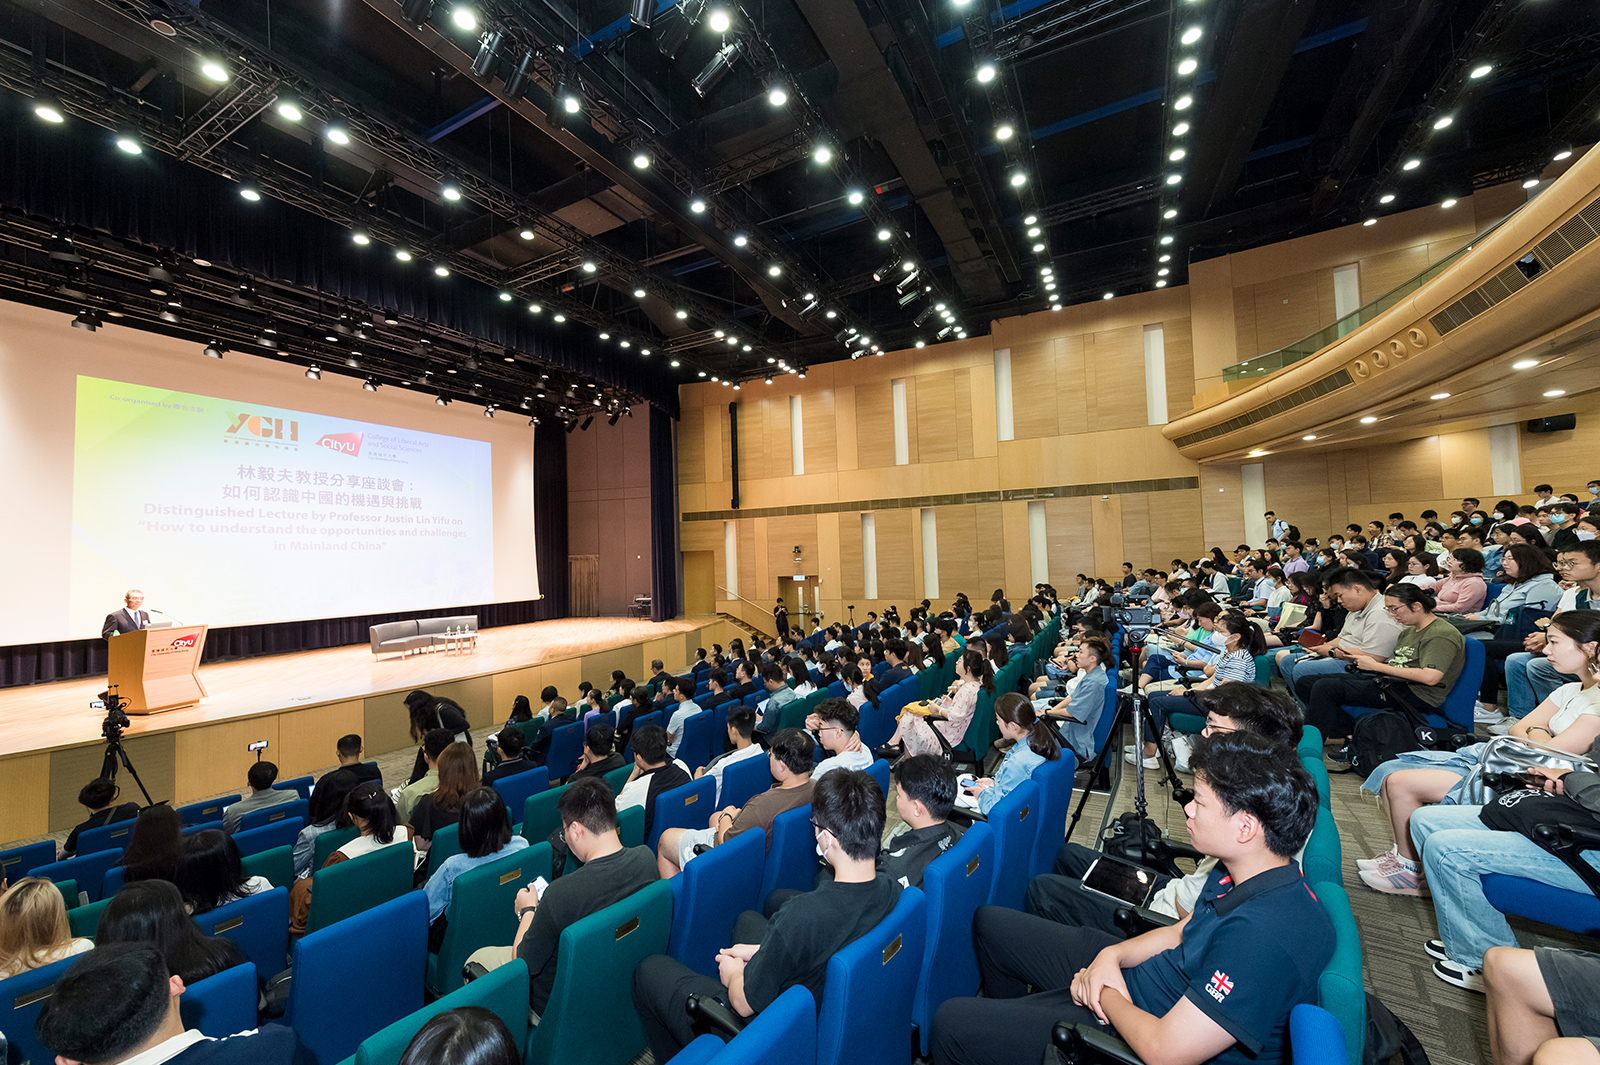 The seminar attracts over 500 CityU faculty, students and members of the public.